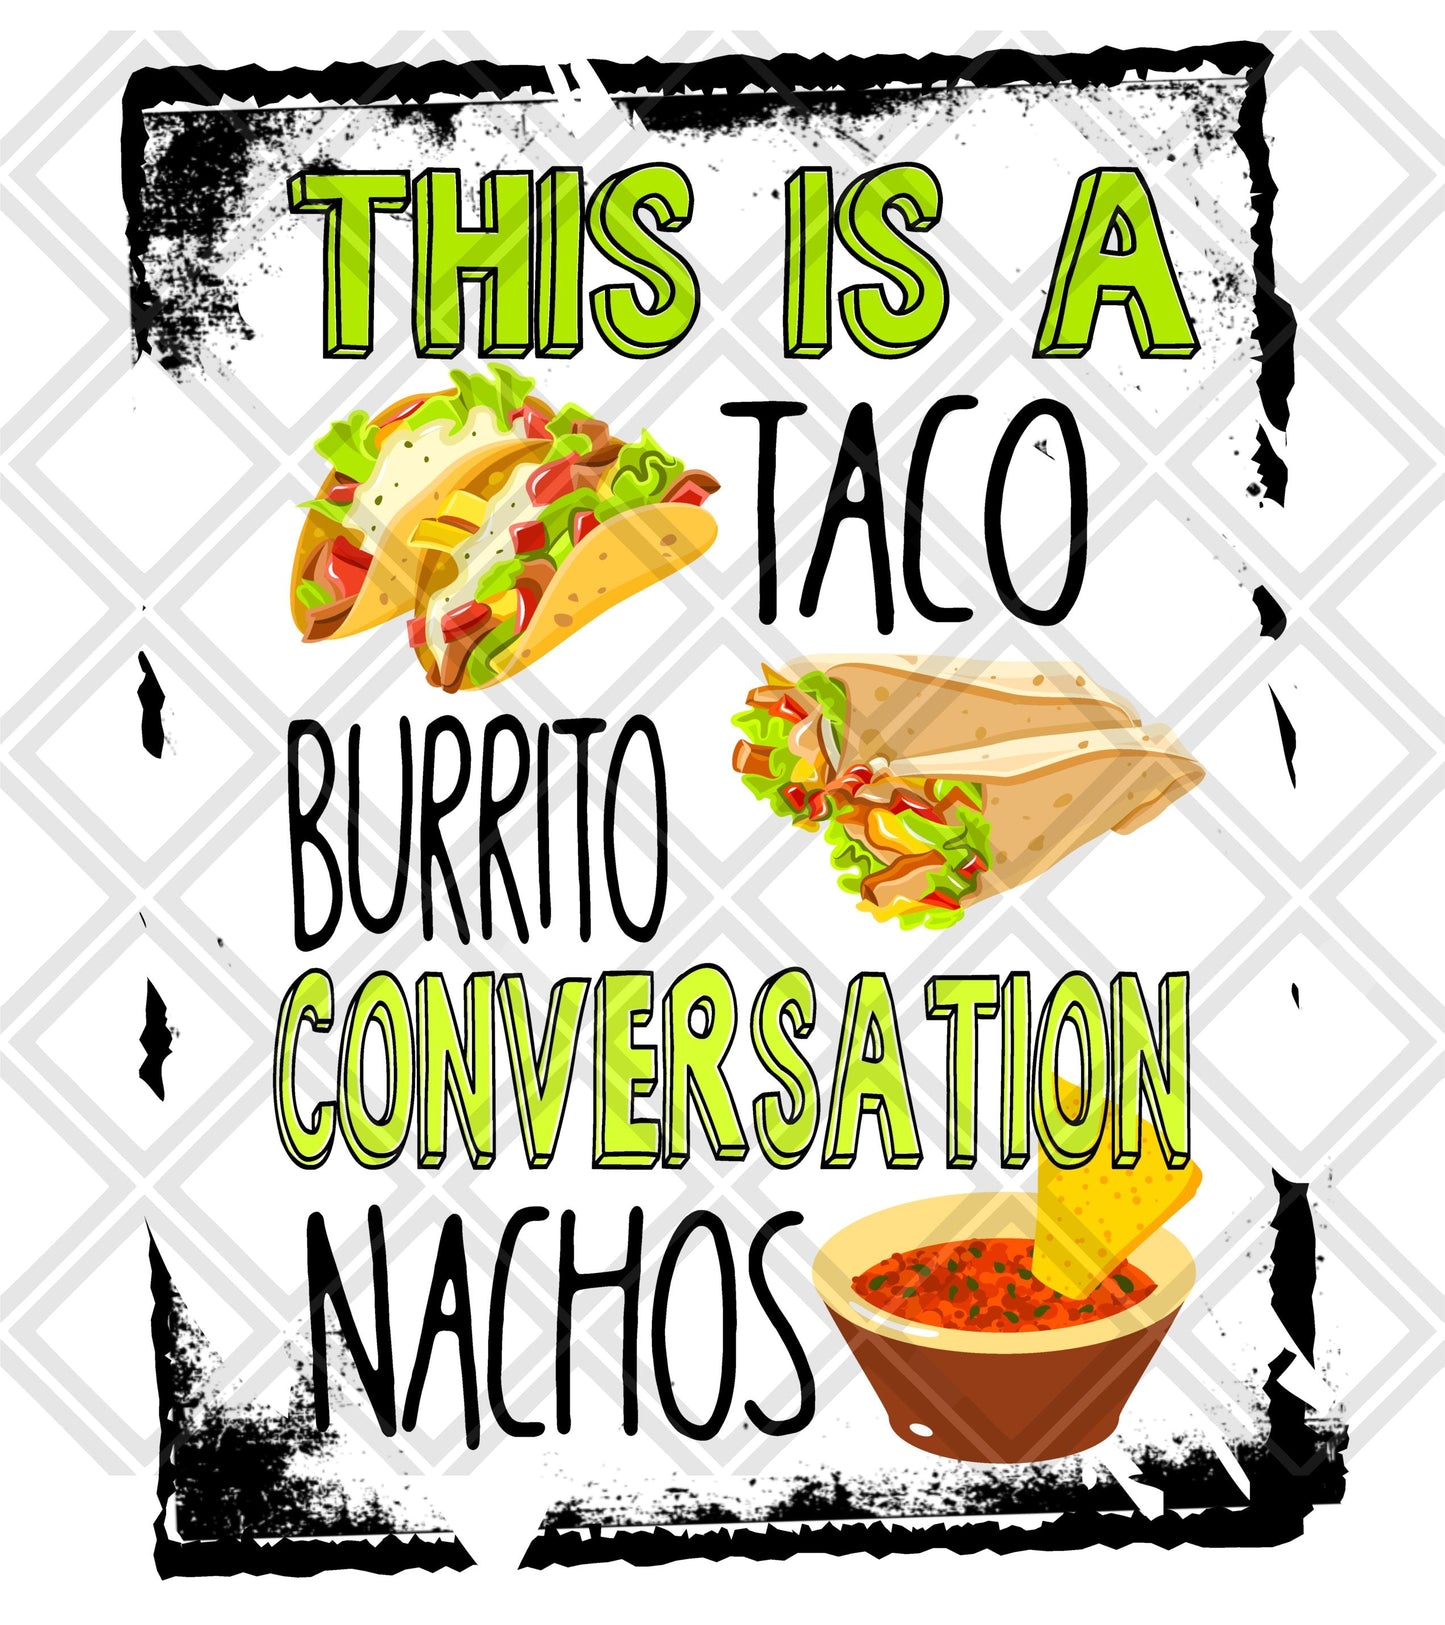 THIS IS A TACO AND BURRITO CONVERSATION NACHOS WITH FRAME  DTF TRANSFERPRINT TO ORDER